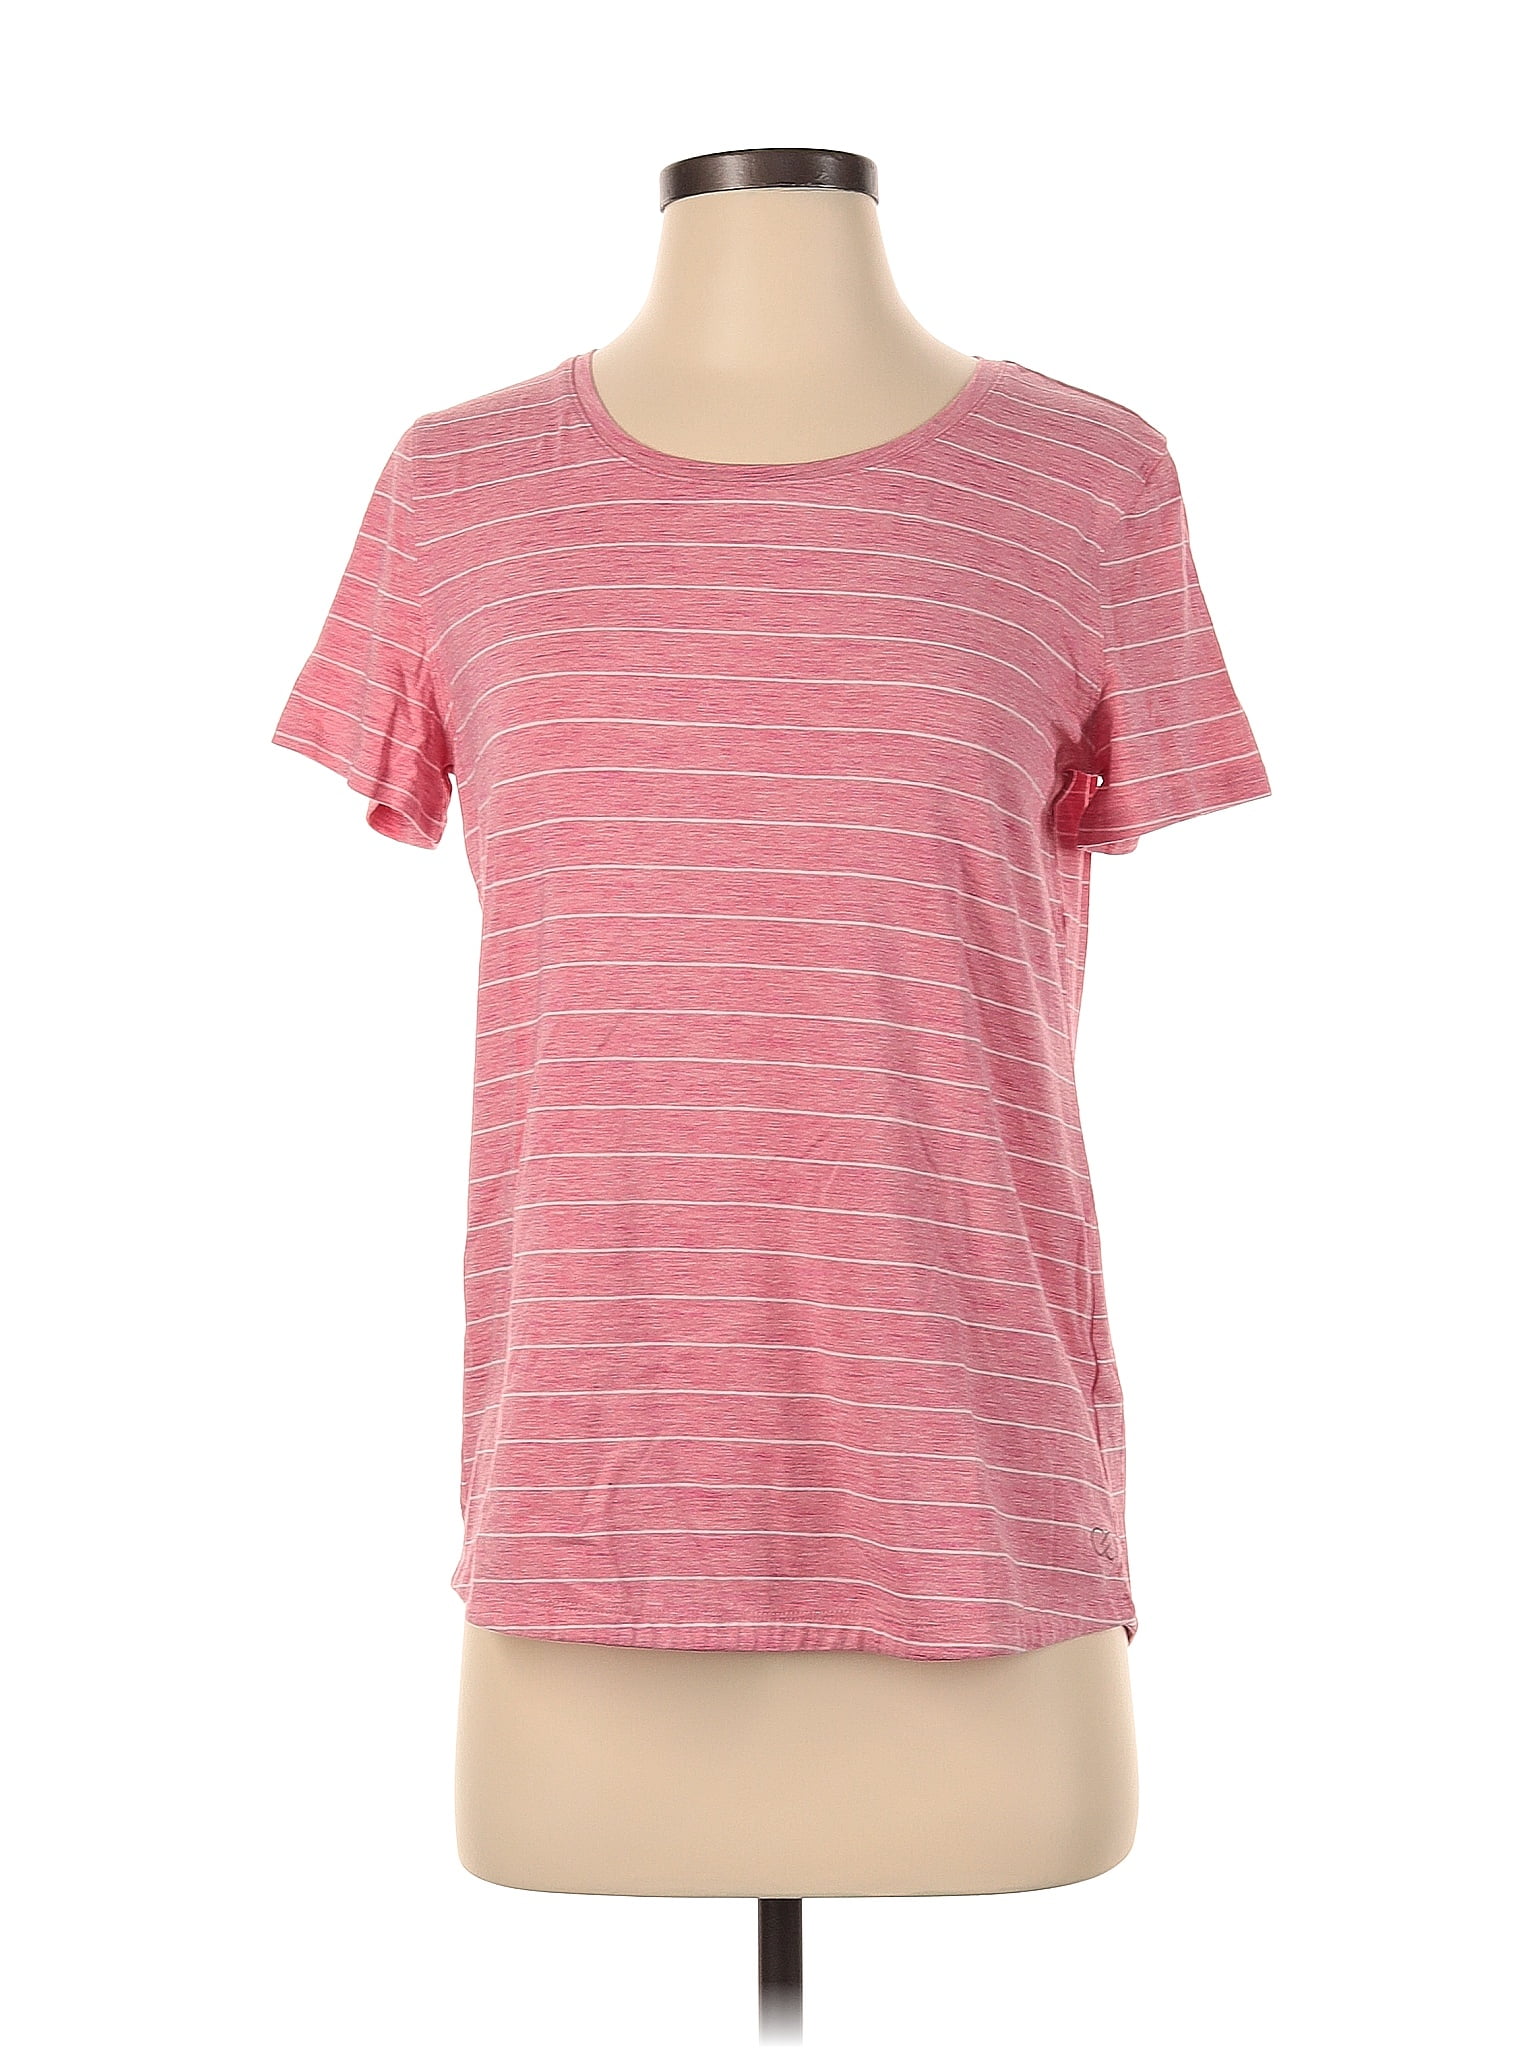 Calia by Carrie Underwood Color Block Stripes Pink Short Sleeve T-Shirt ...